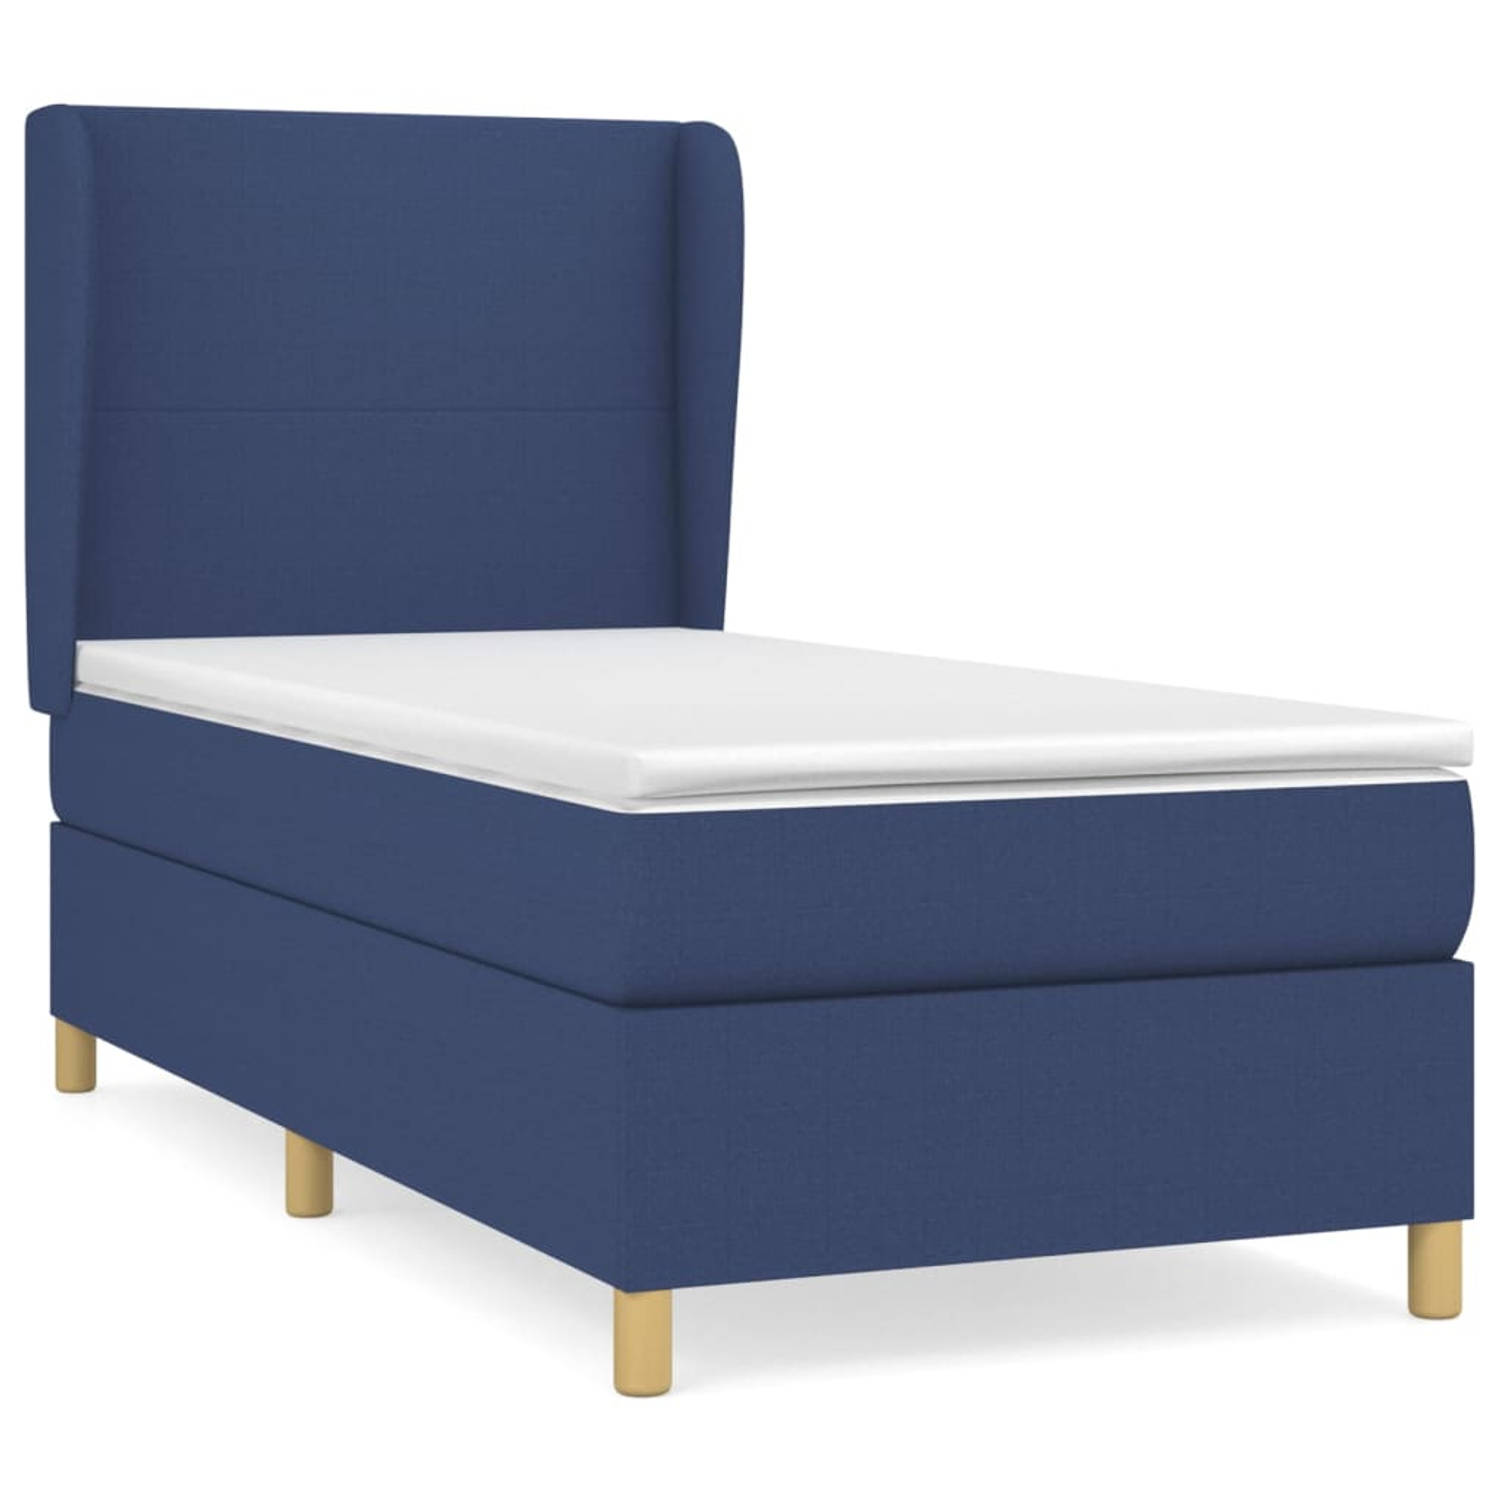 The Living Store Boxspringbed - Comfort Plus - Bed - 193 x 93 x 118/128 cm - Blauw - Stof - Pocketvering